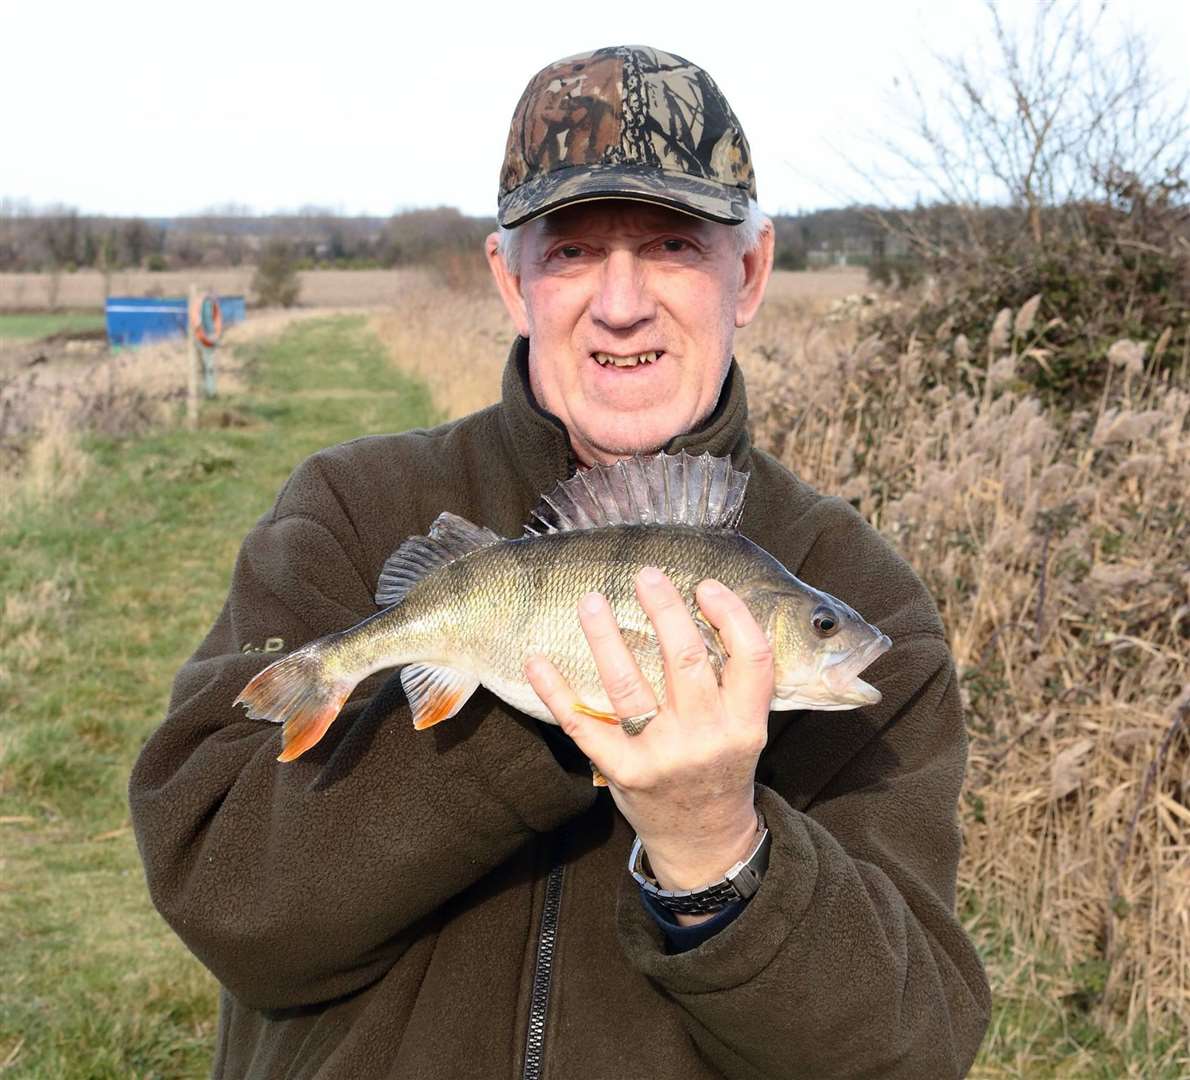 An angler with a perch - one of the hardest fighting fish in our ponds and rivers